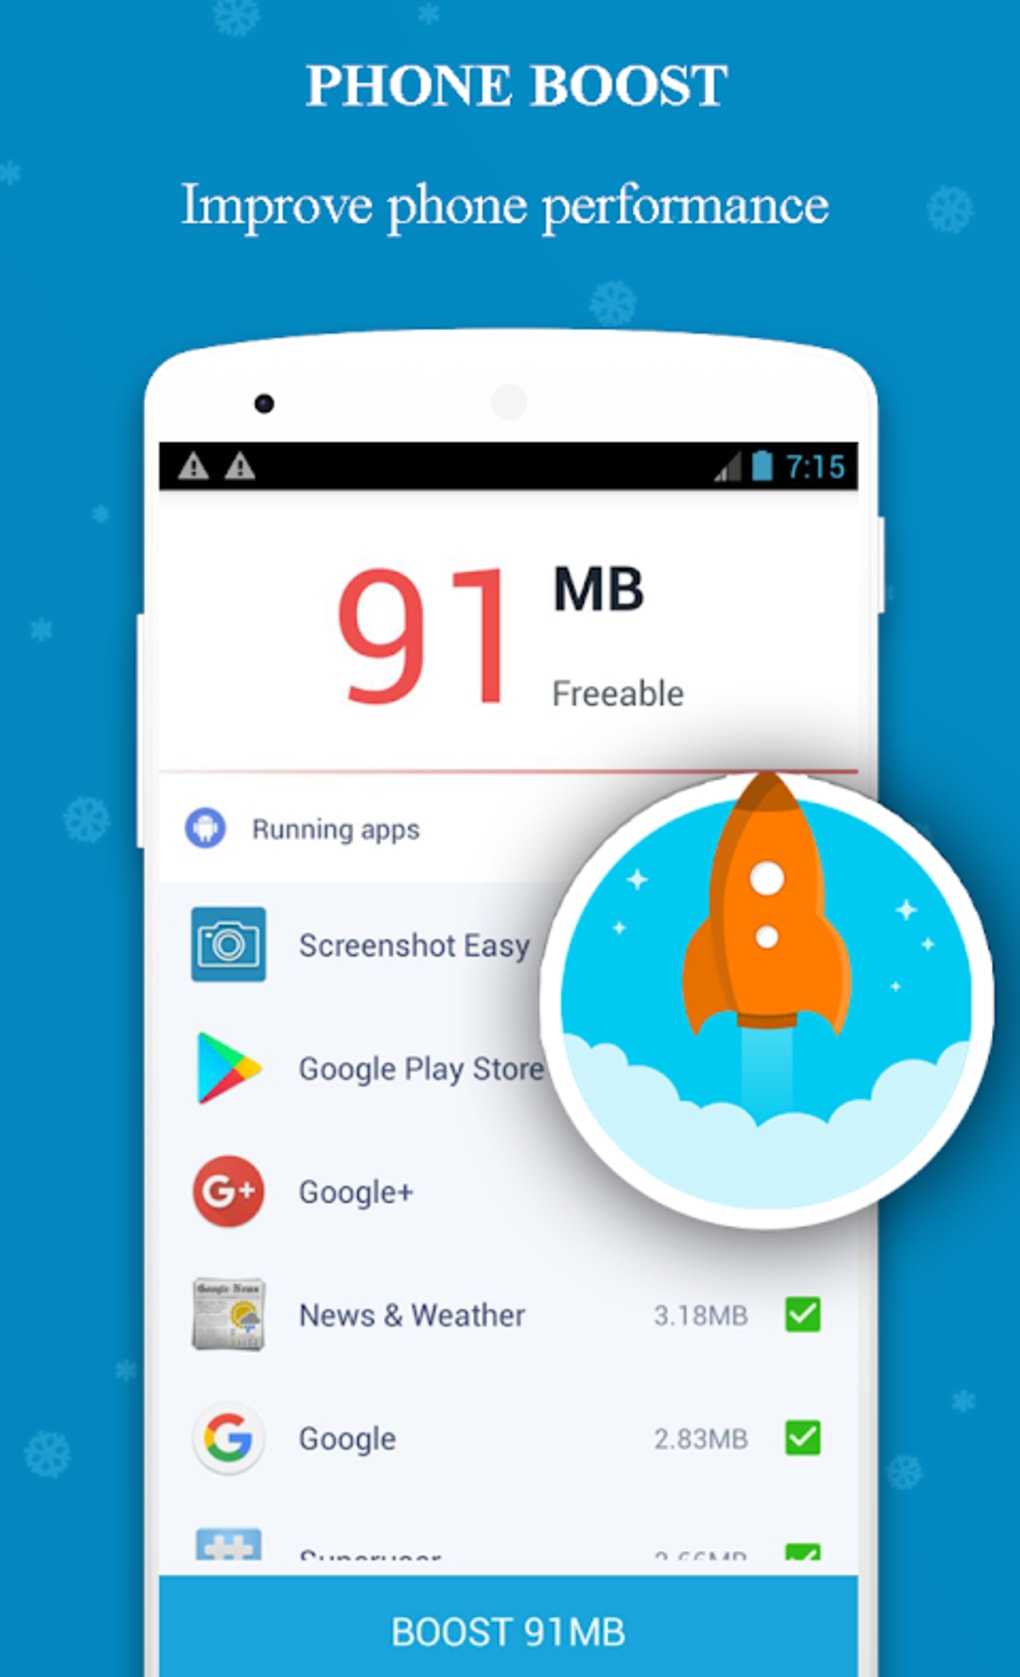 Mobile Cooling - Apps on Google Play